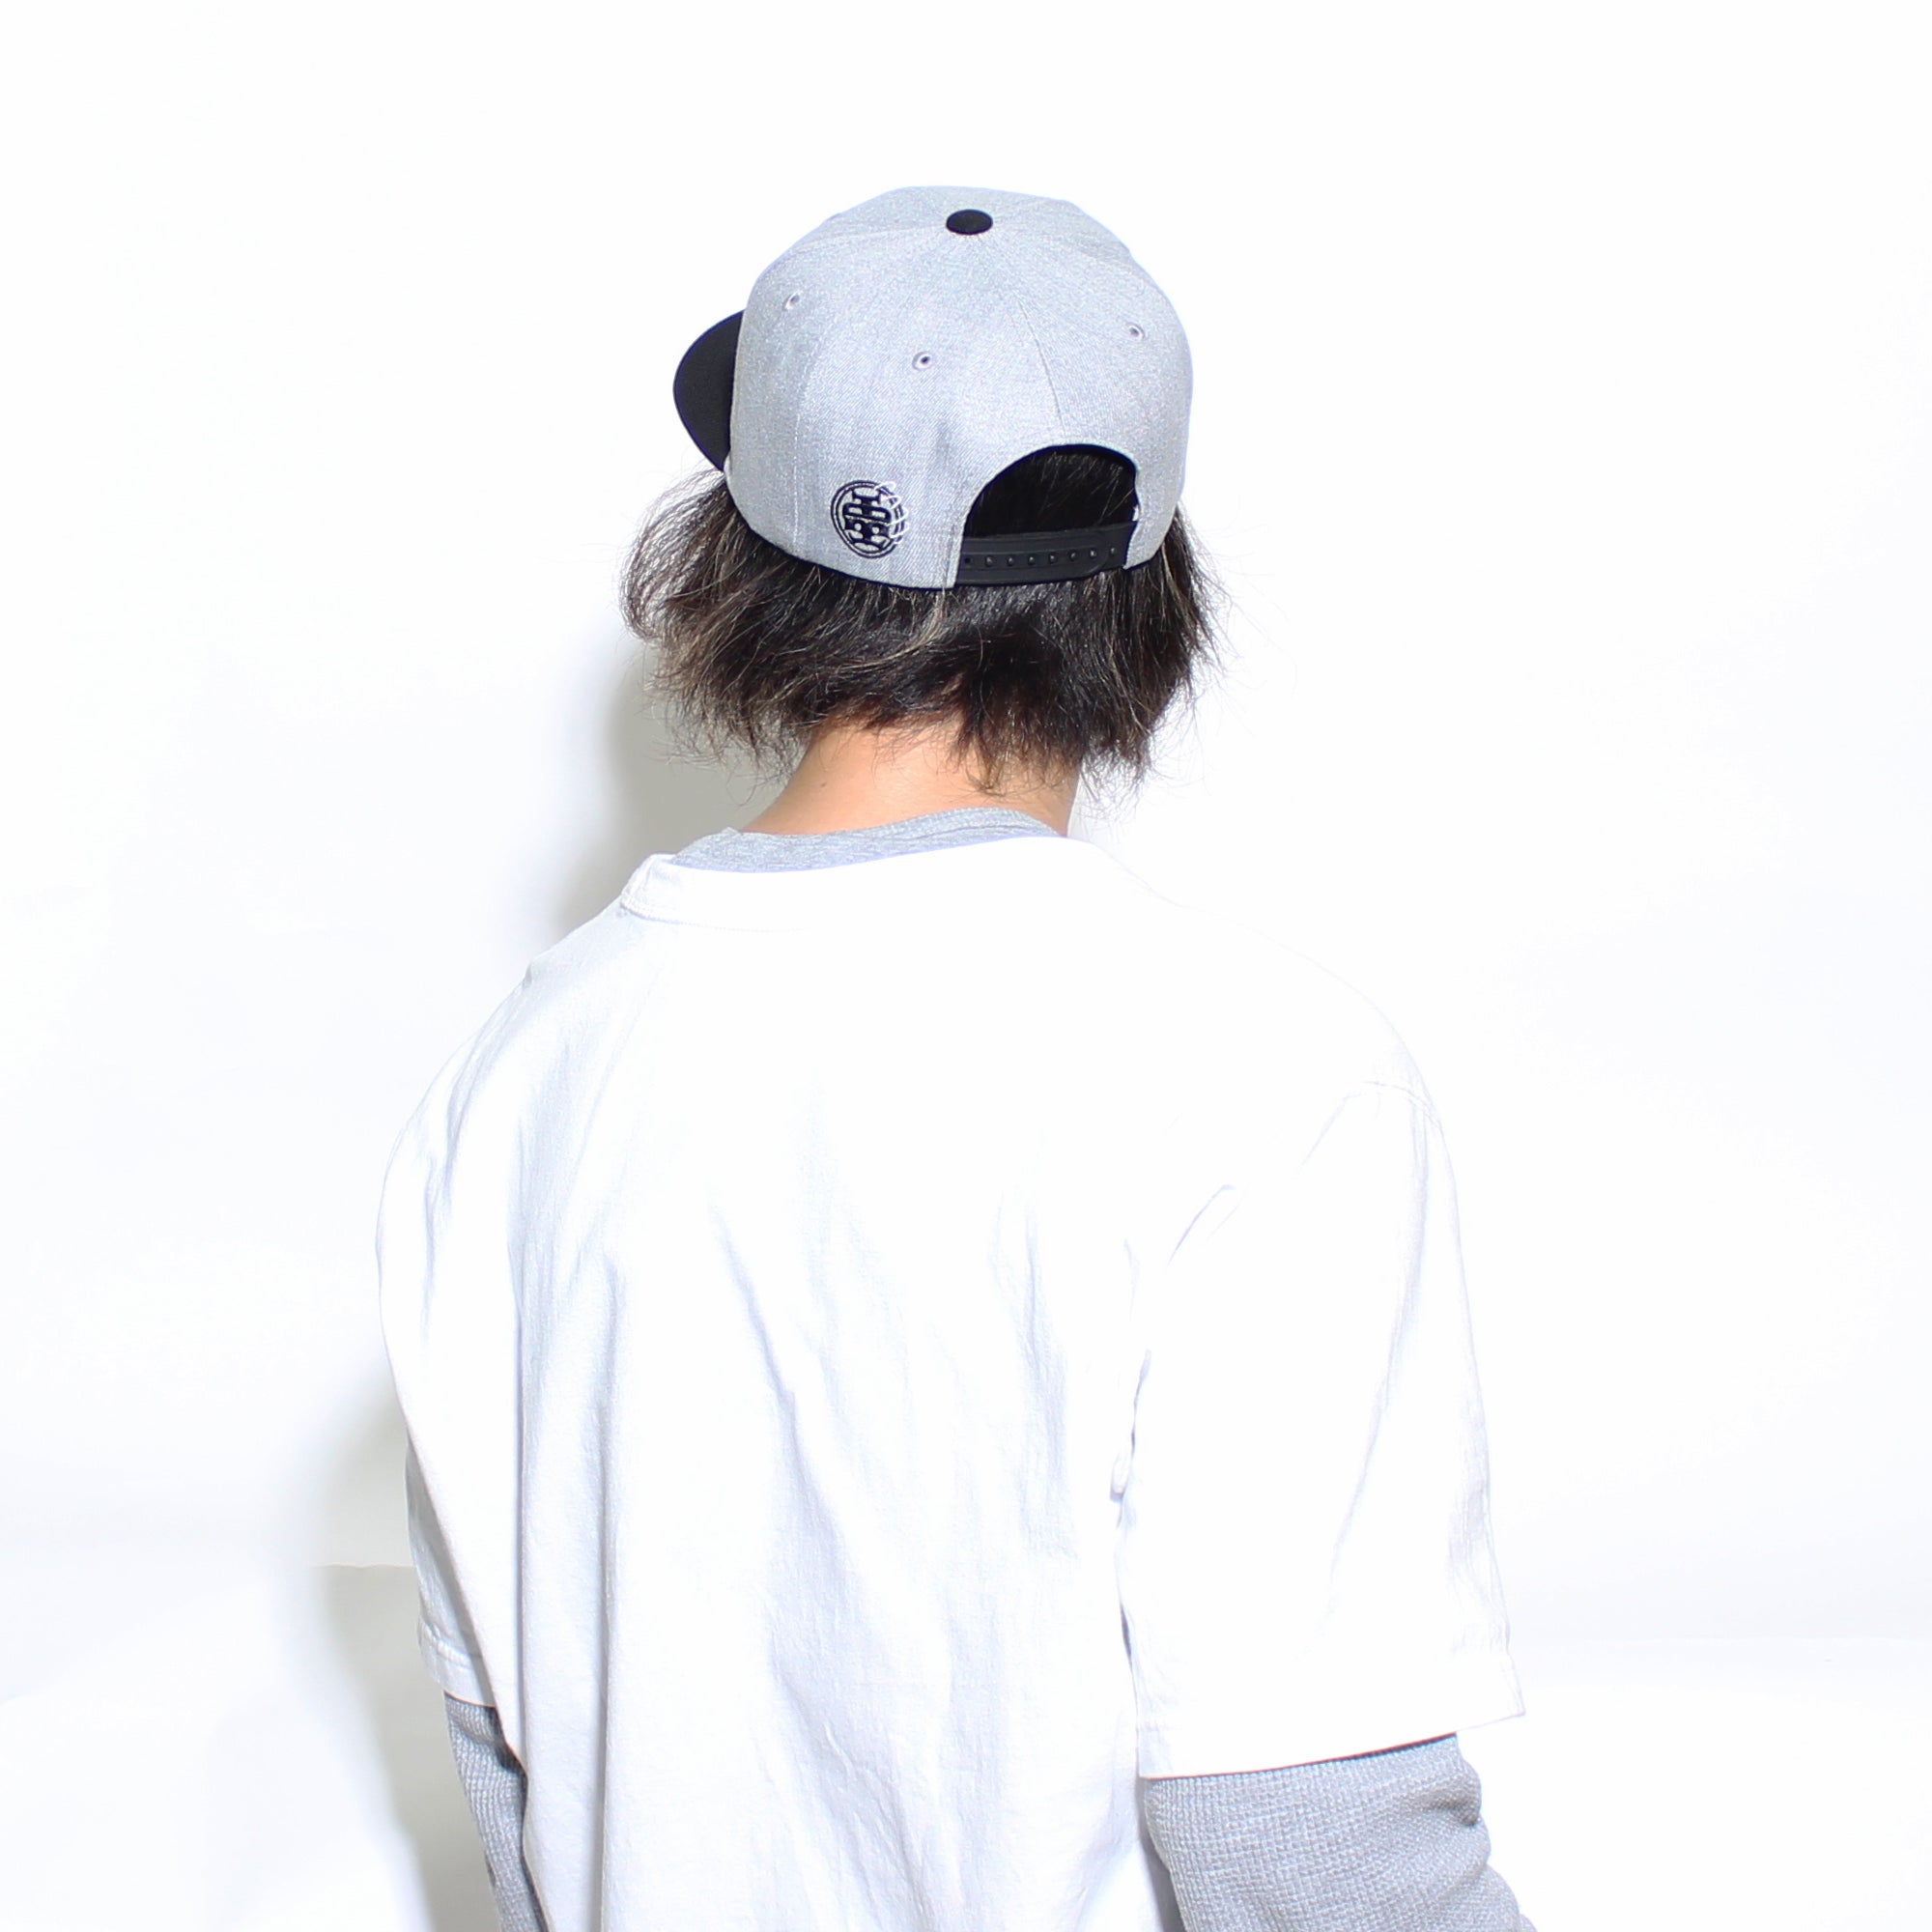 【Me'SSAGE】Essential Homie SNAPBACK 【Limited】